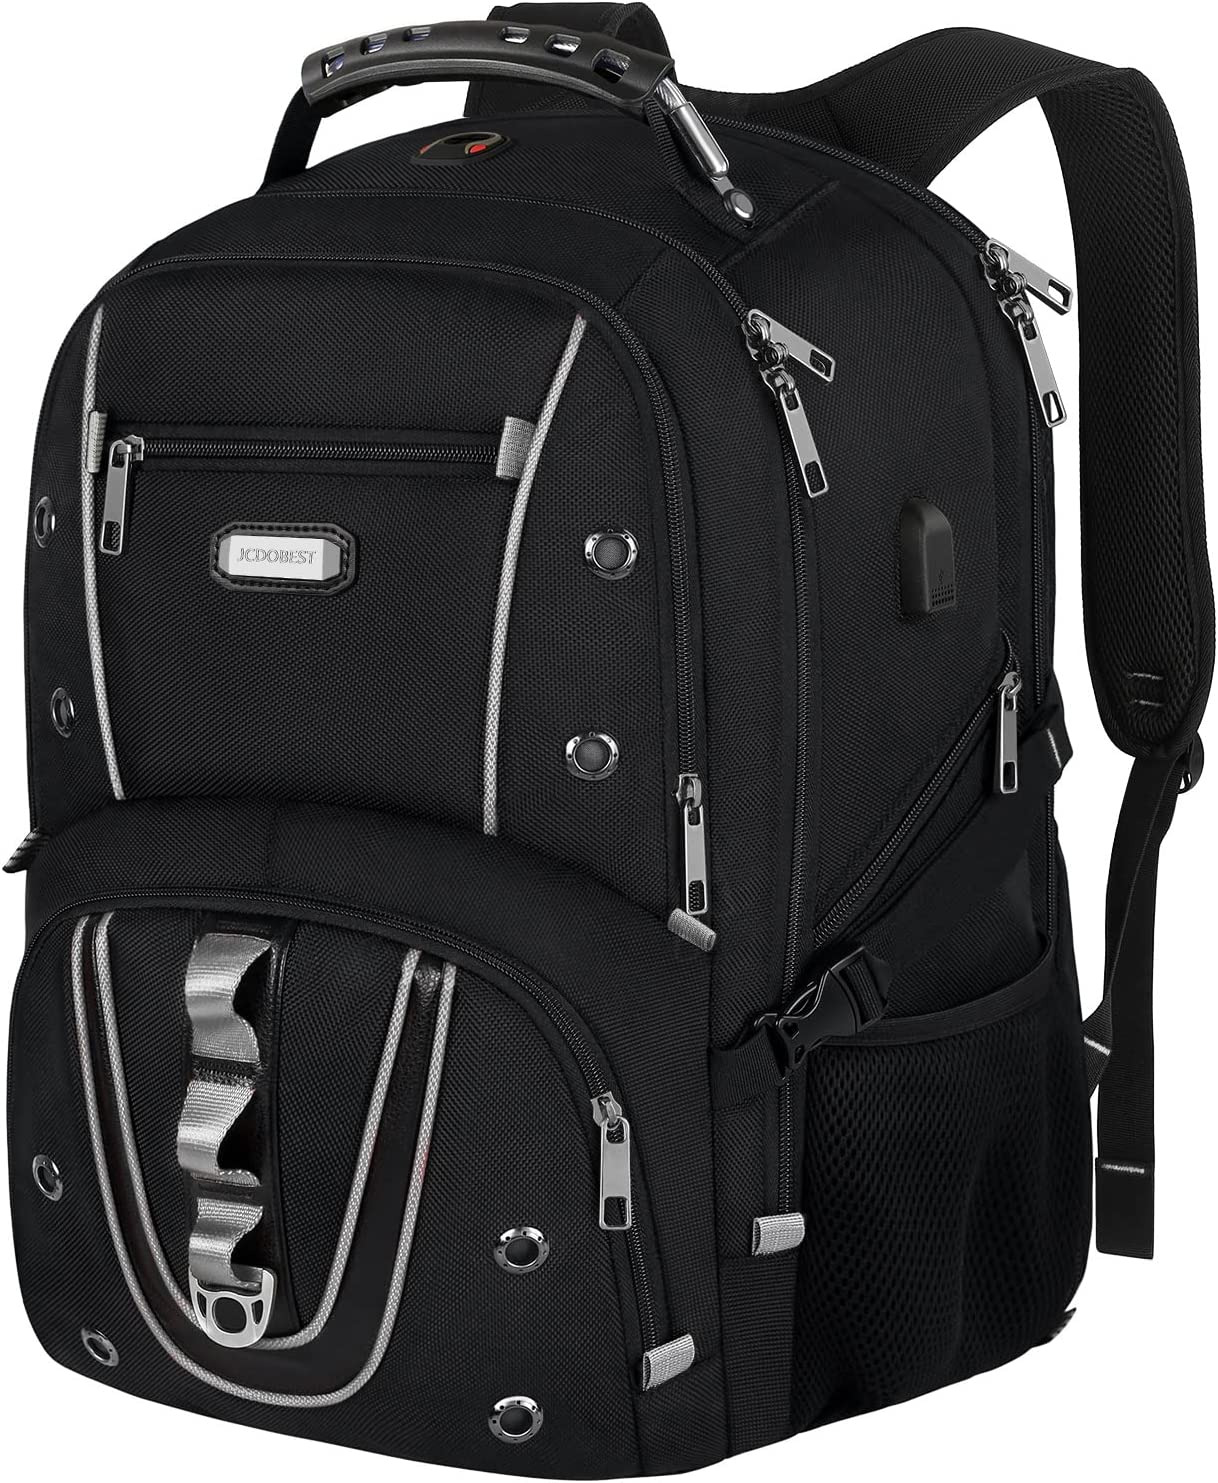 Travel Laptop Backpack, 17.3 Inch XL Heavy Duty Computer Backpack with RFID Pock